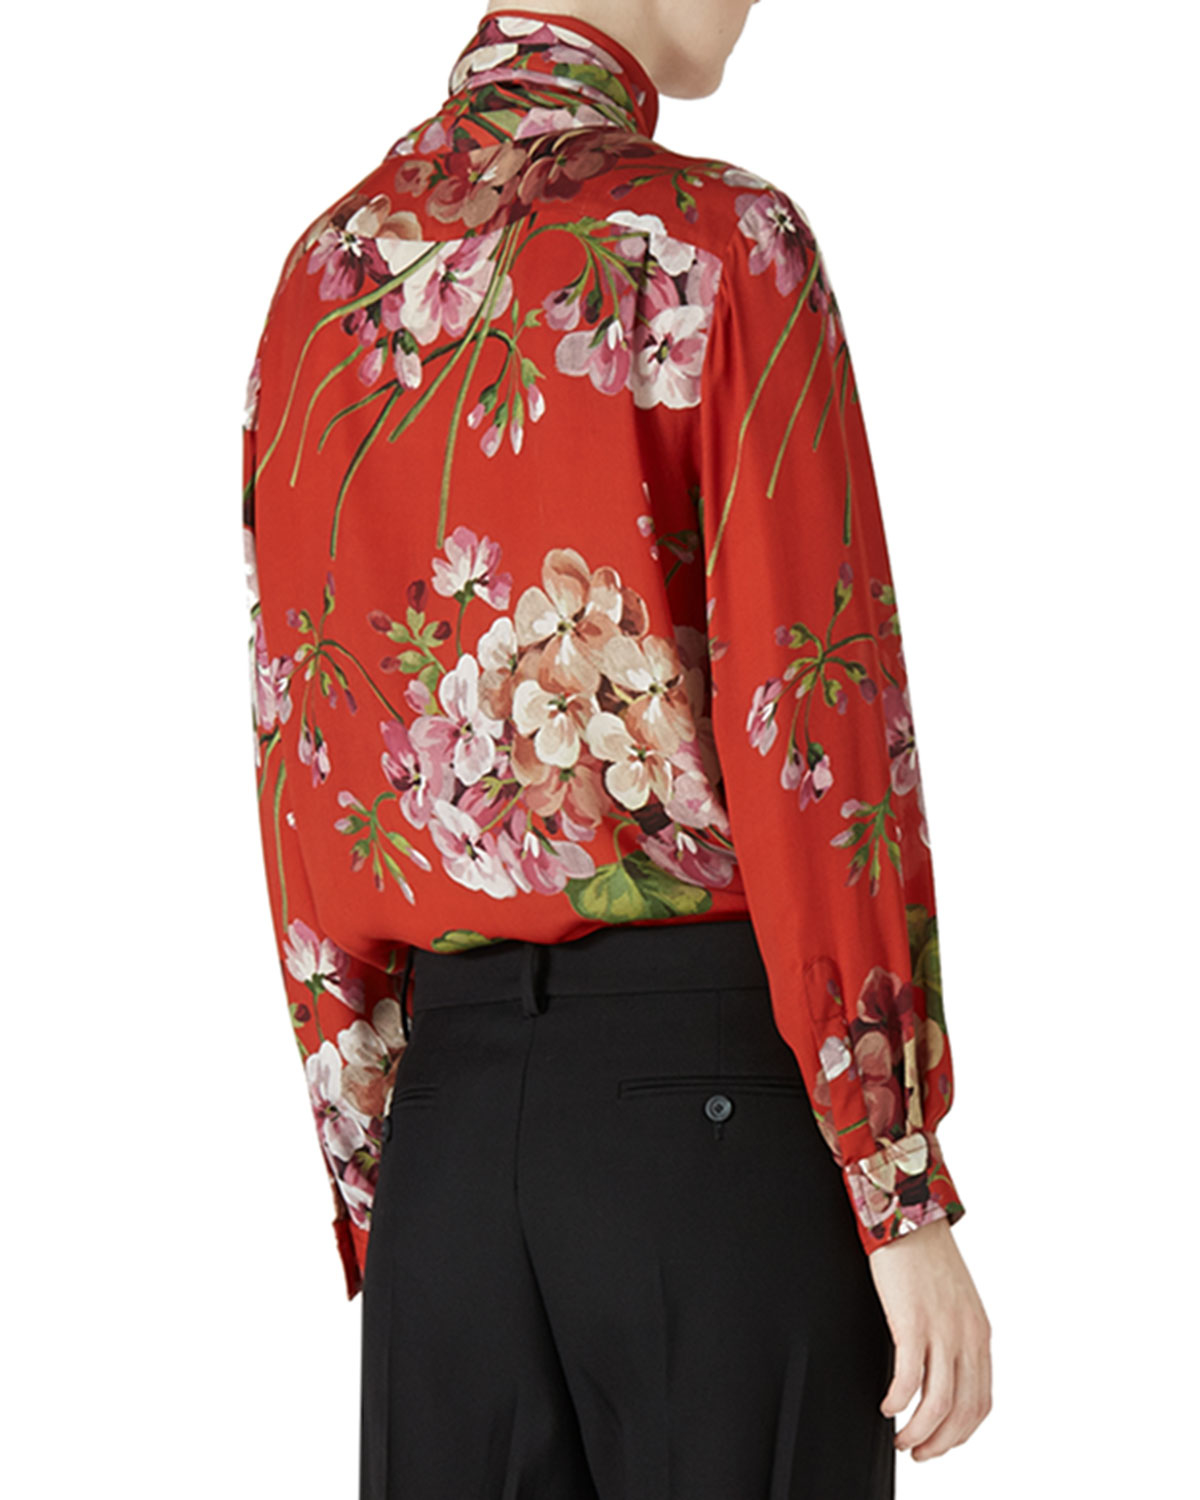 Gucci Floral Print Silk Blouse in Black | Lyst